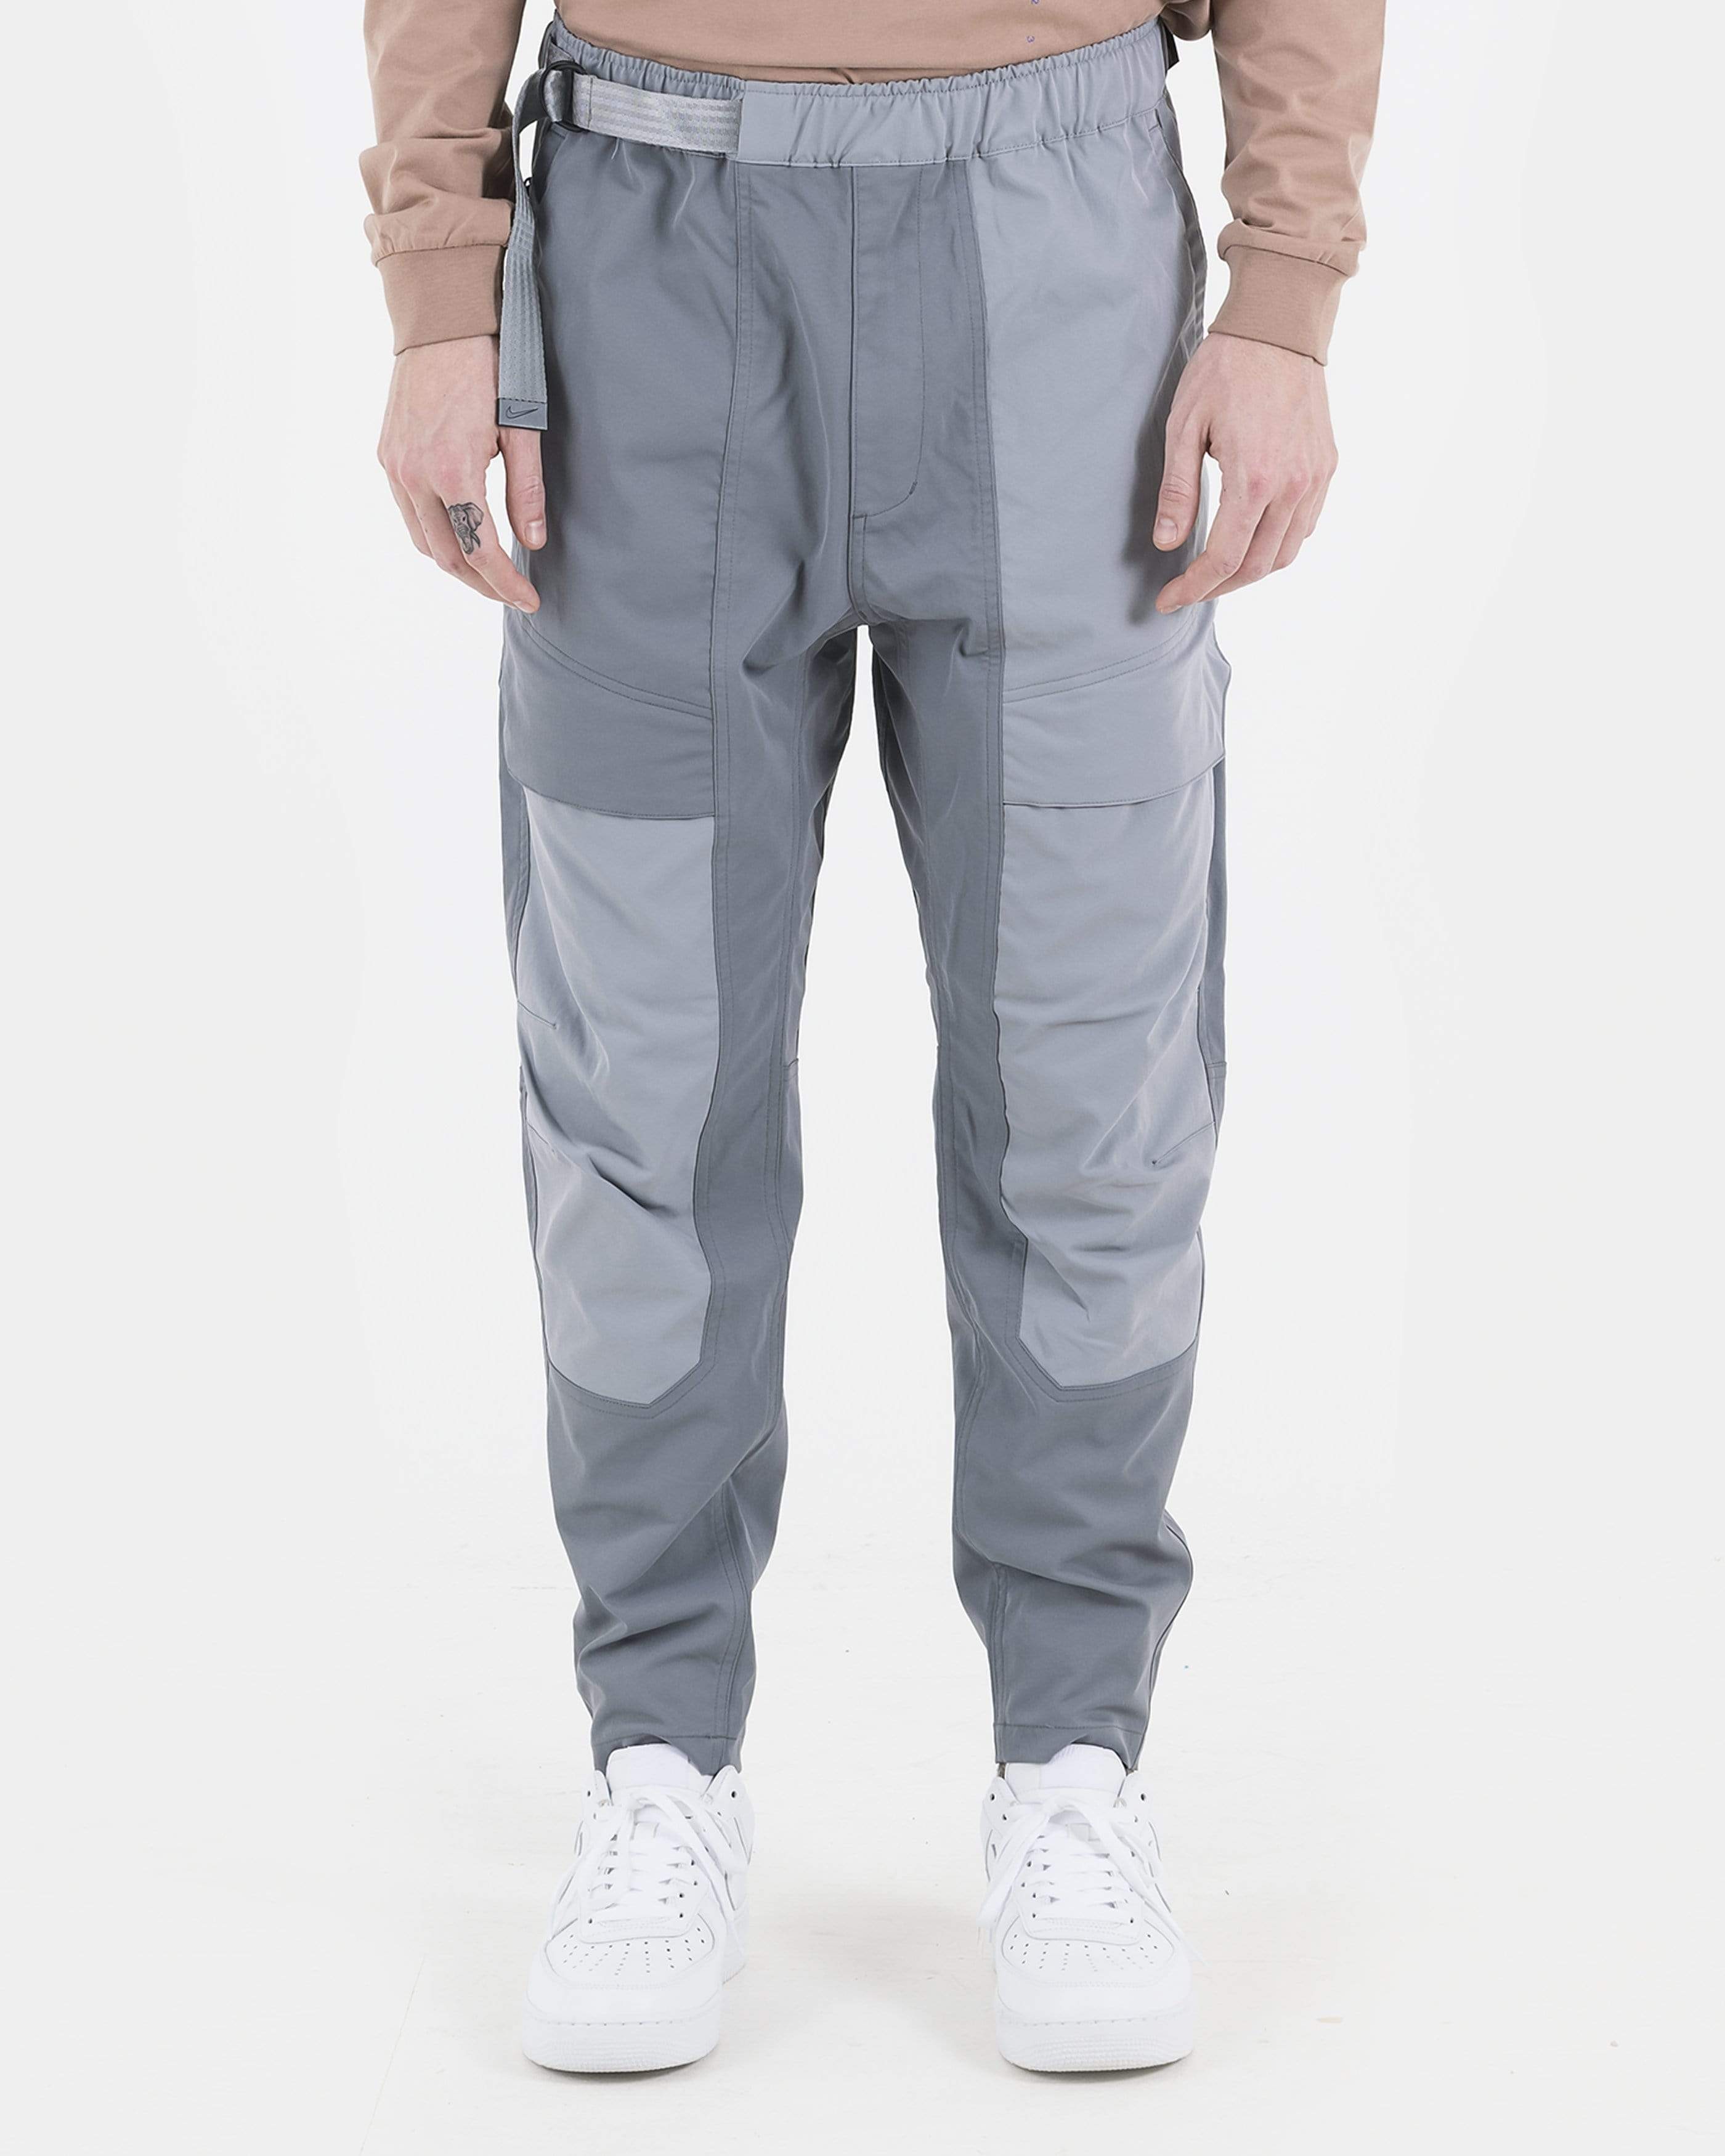 Tech Pack Woven Pants in Grey – SVRN